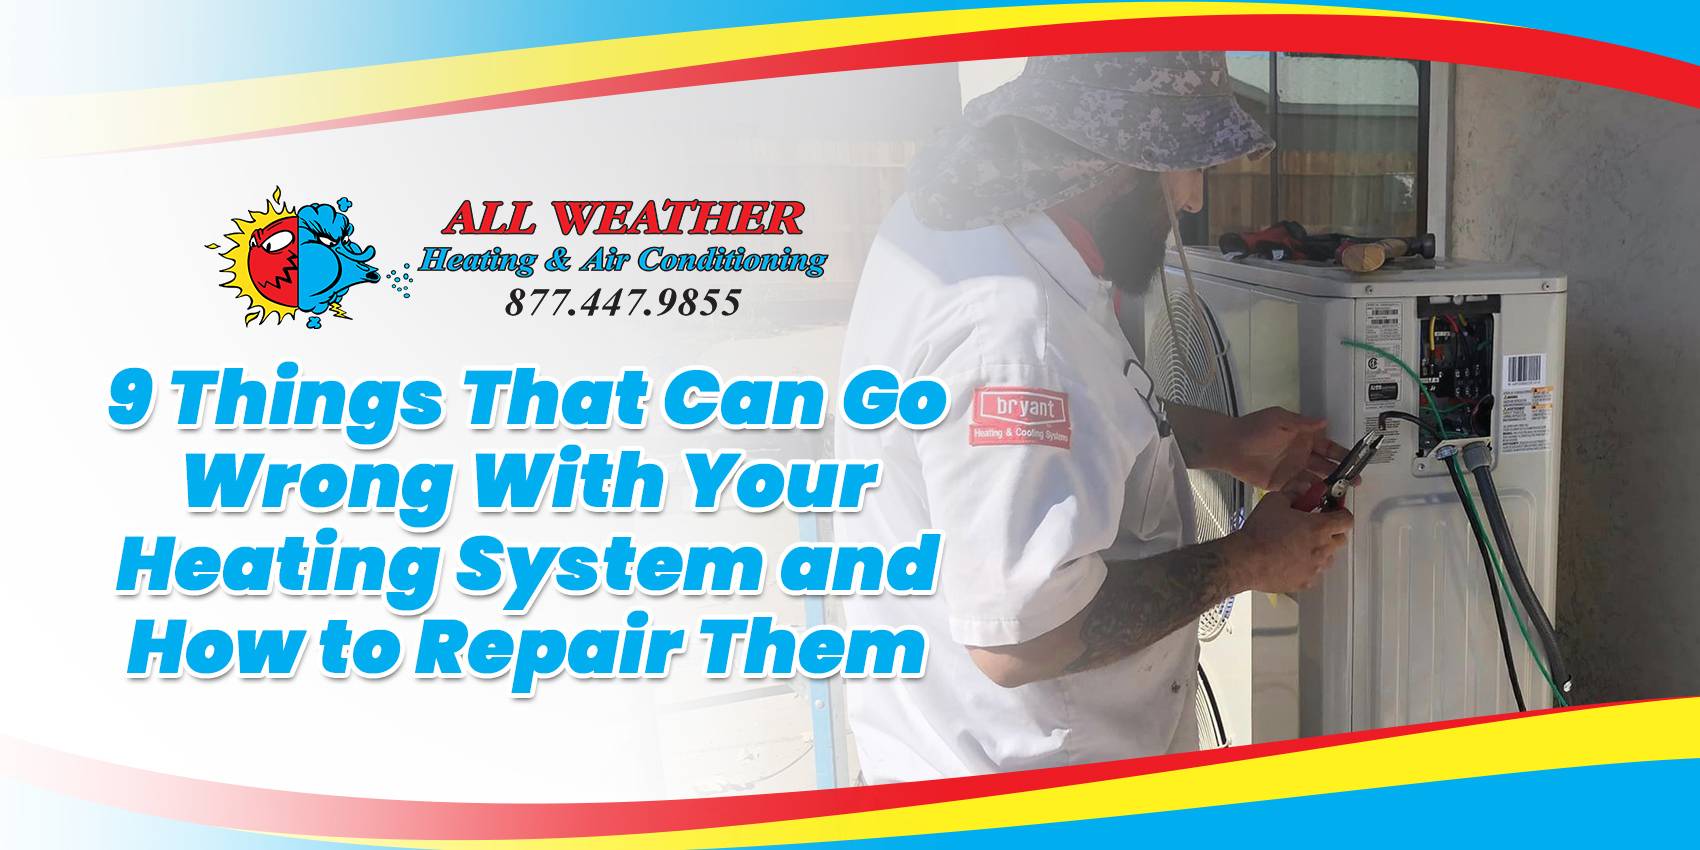 9 Things That Can Go Wrong With Your Heating System and How to Repair Them